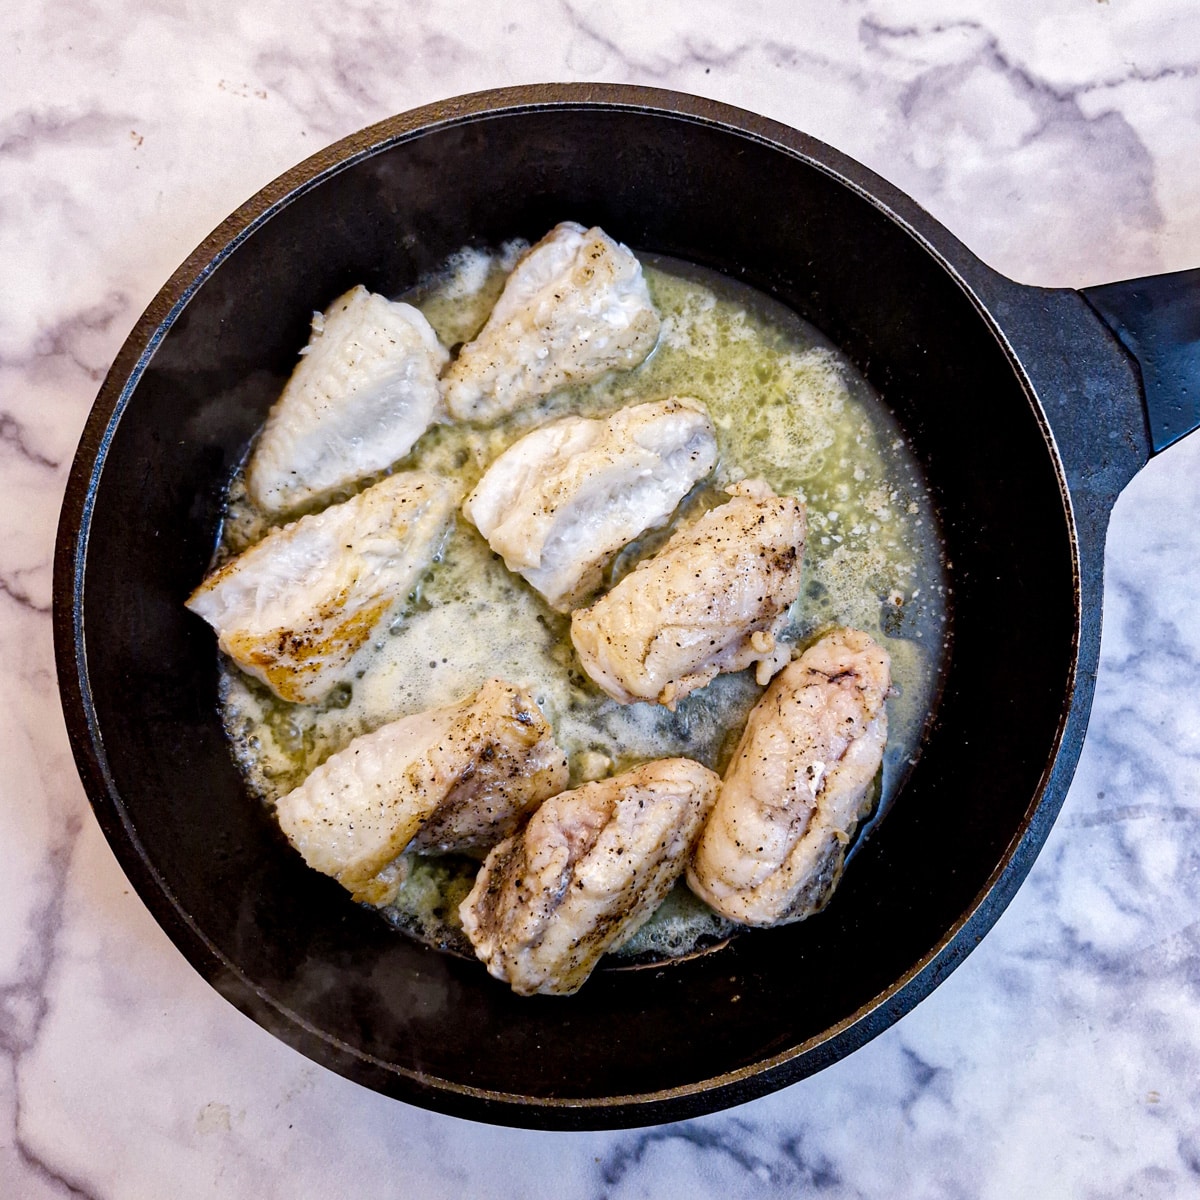 Fully cooked monkfish fillets in a frying pan.